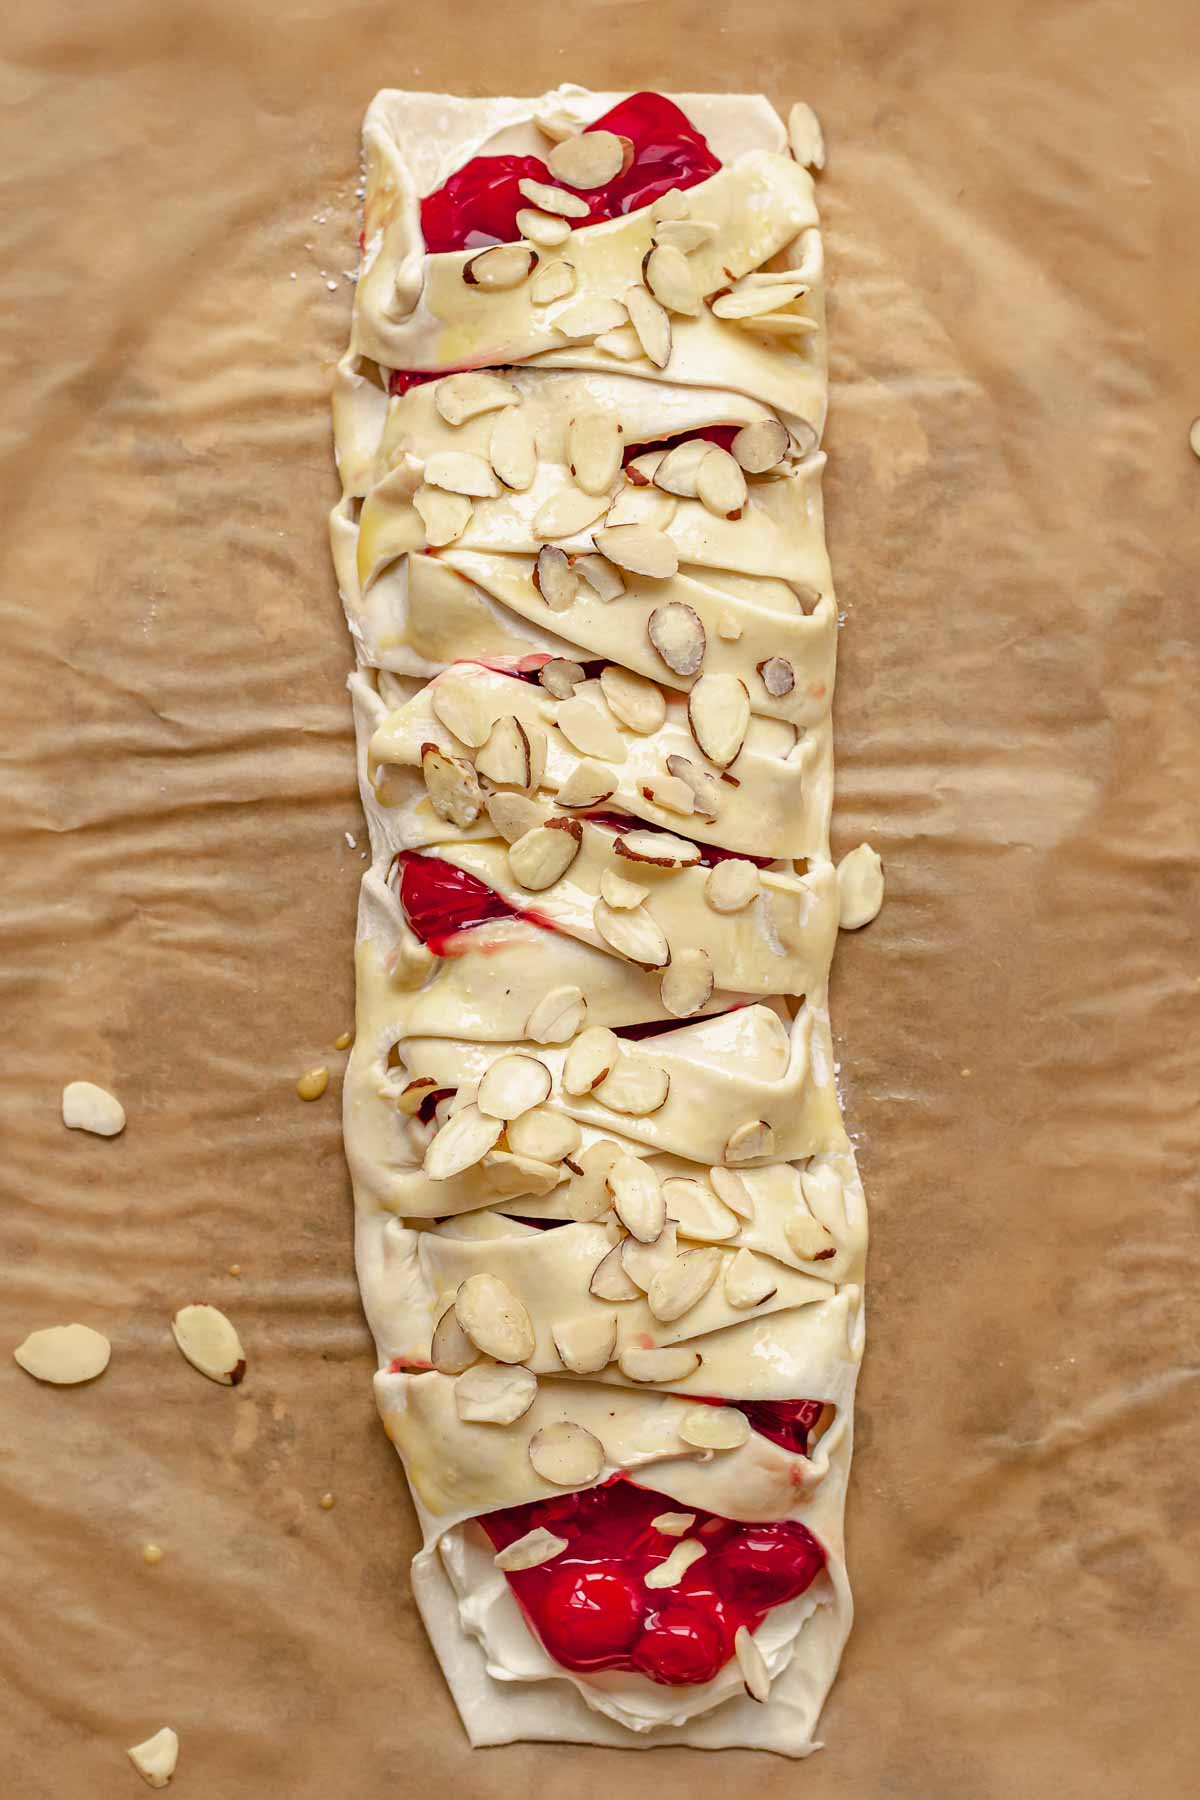 Sliced almonds sprinkled on top of the pre-baked danish.